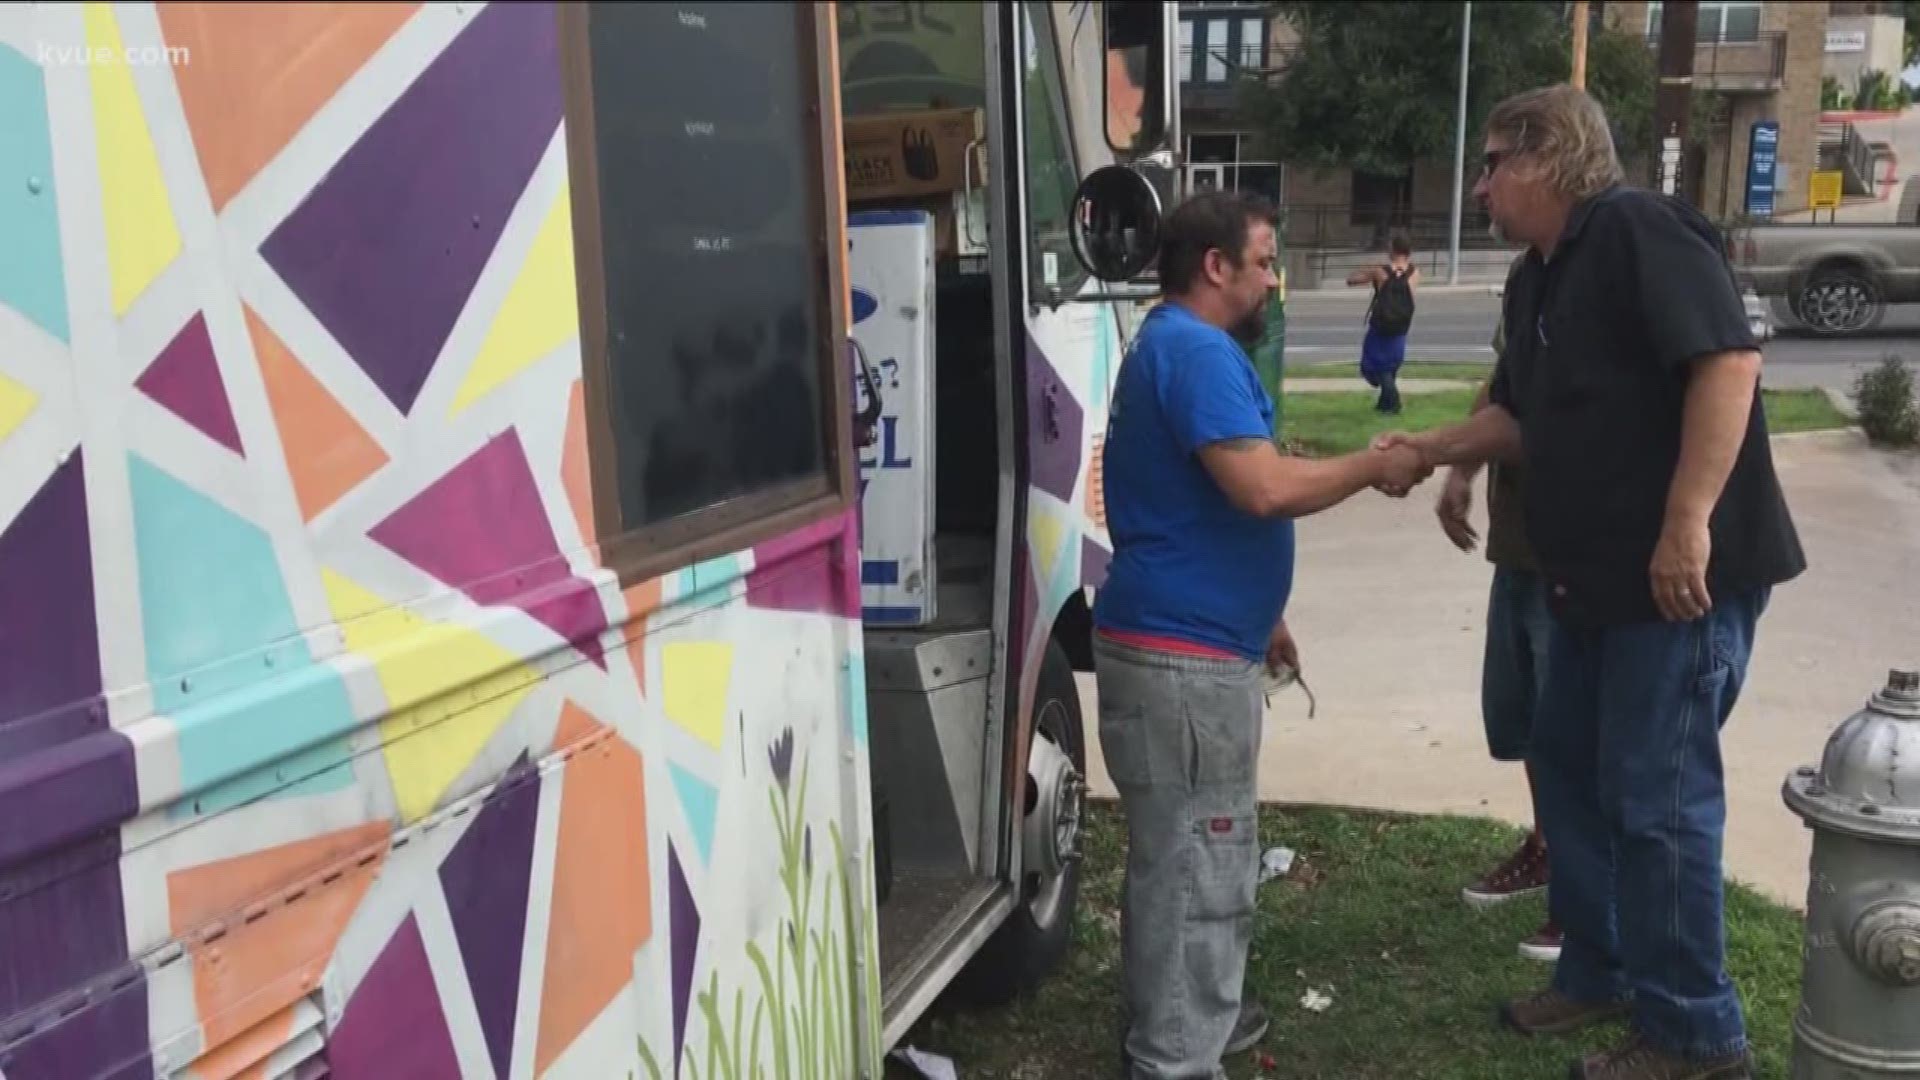 Owner of food truck in South Austin and Mayor Adler weigh in on recent vandalism.